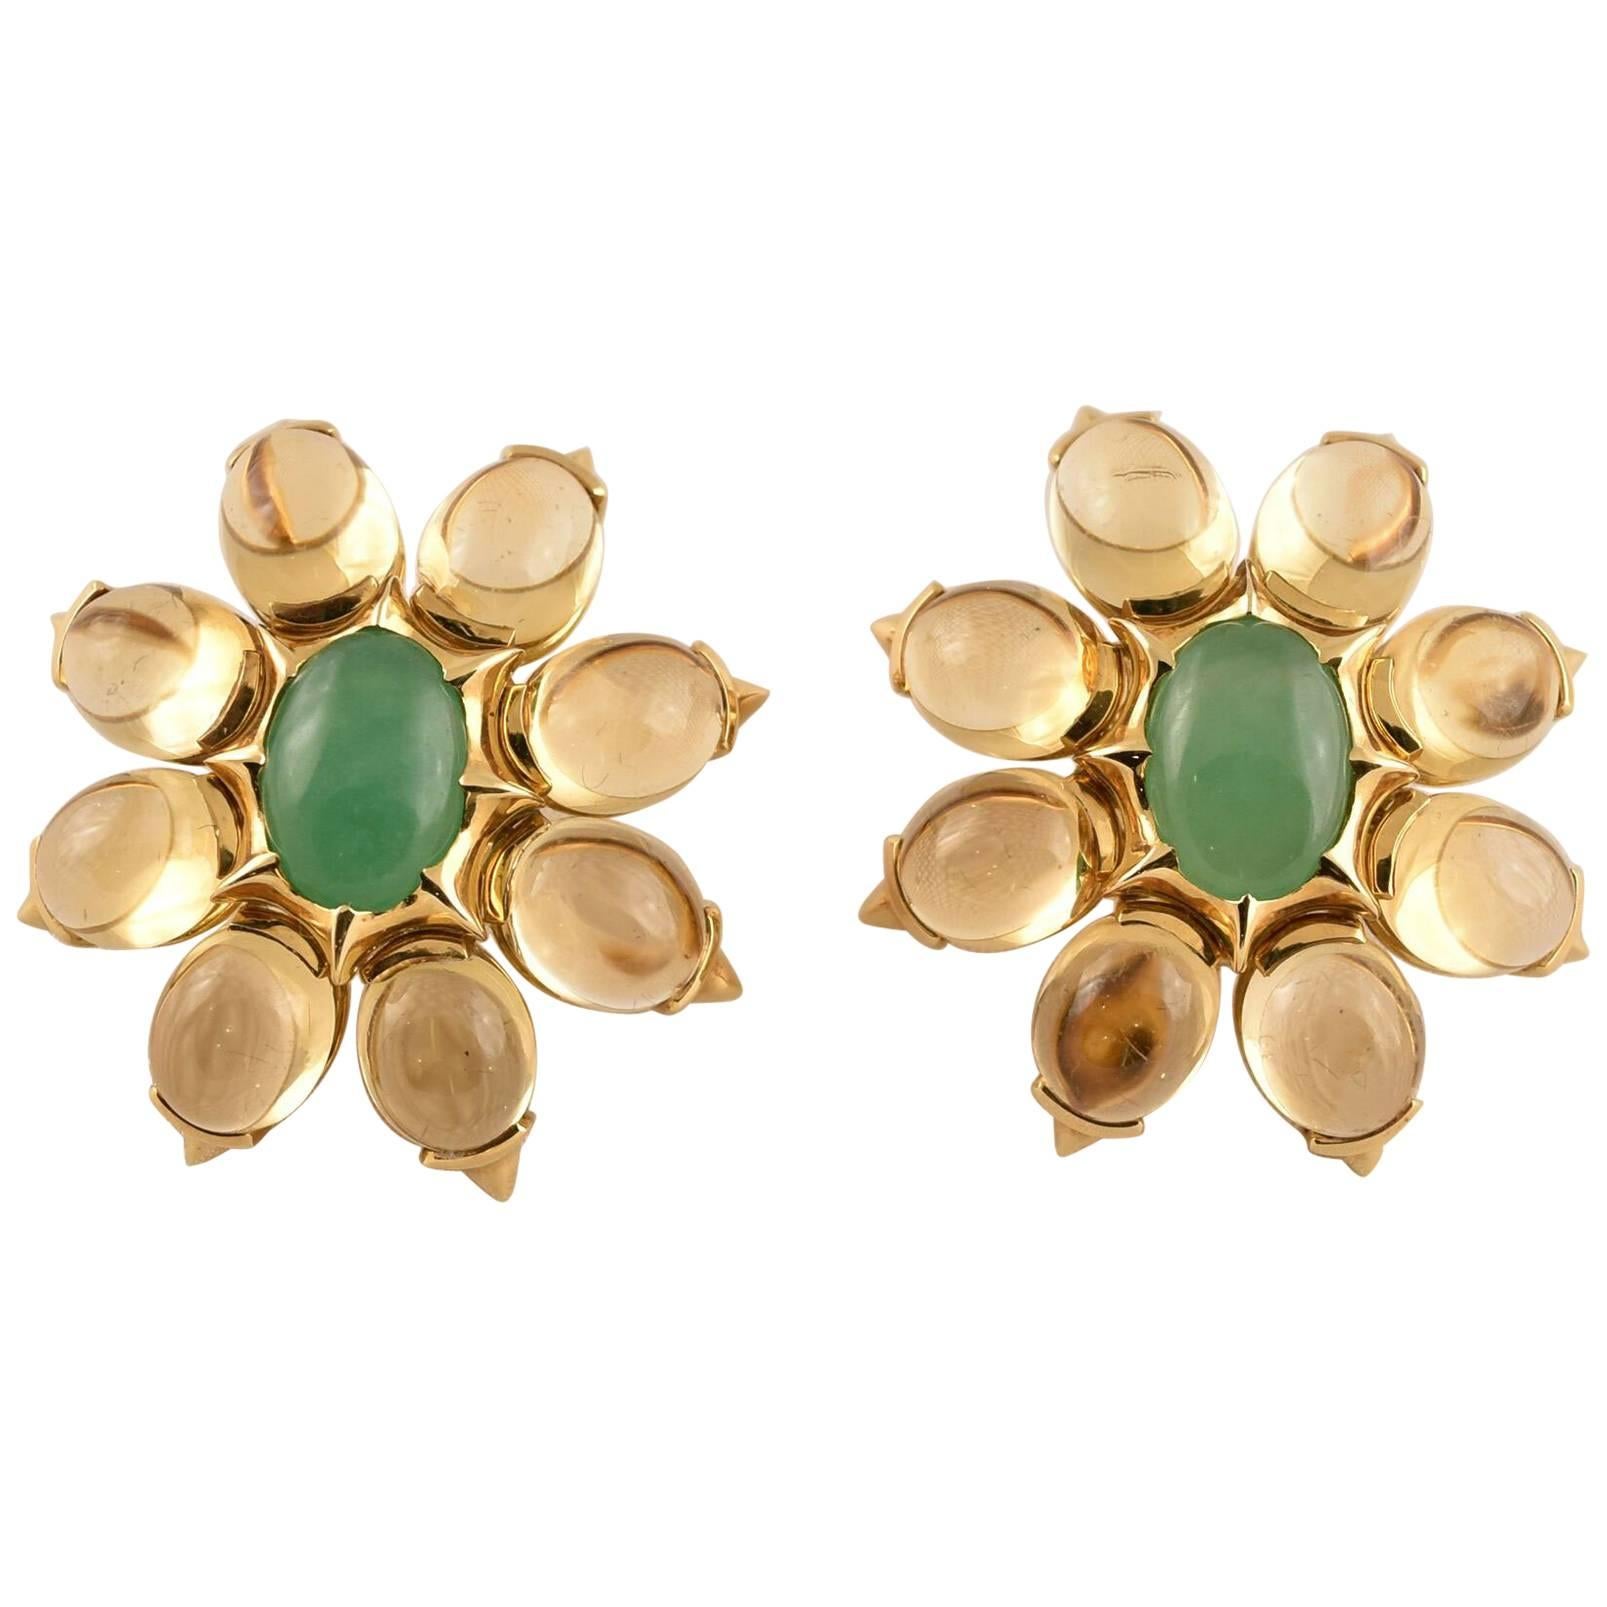 Beautiful Tony Duquette Citrine and Chrysophrase Gold Clip-On Earrings